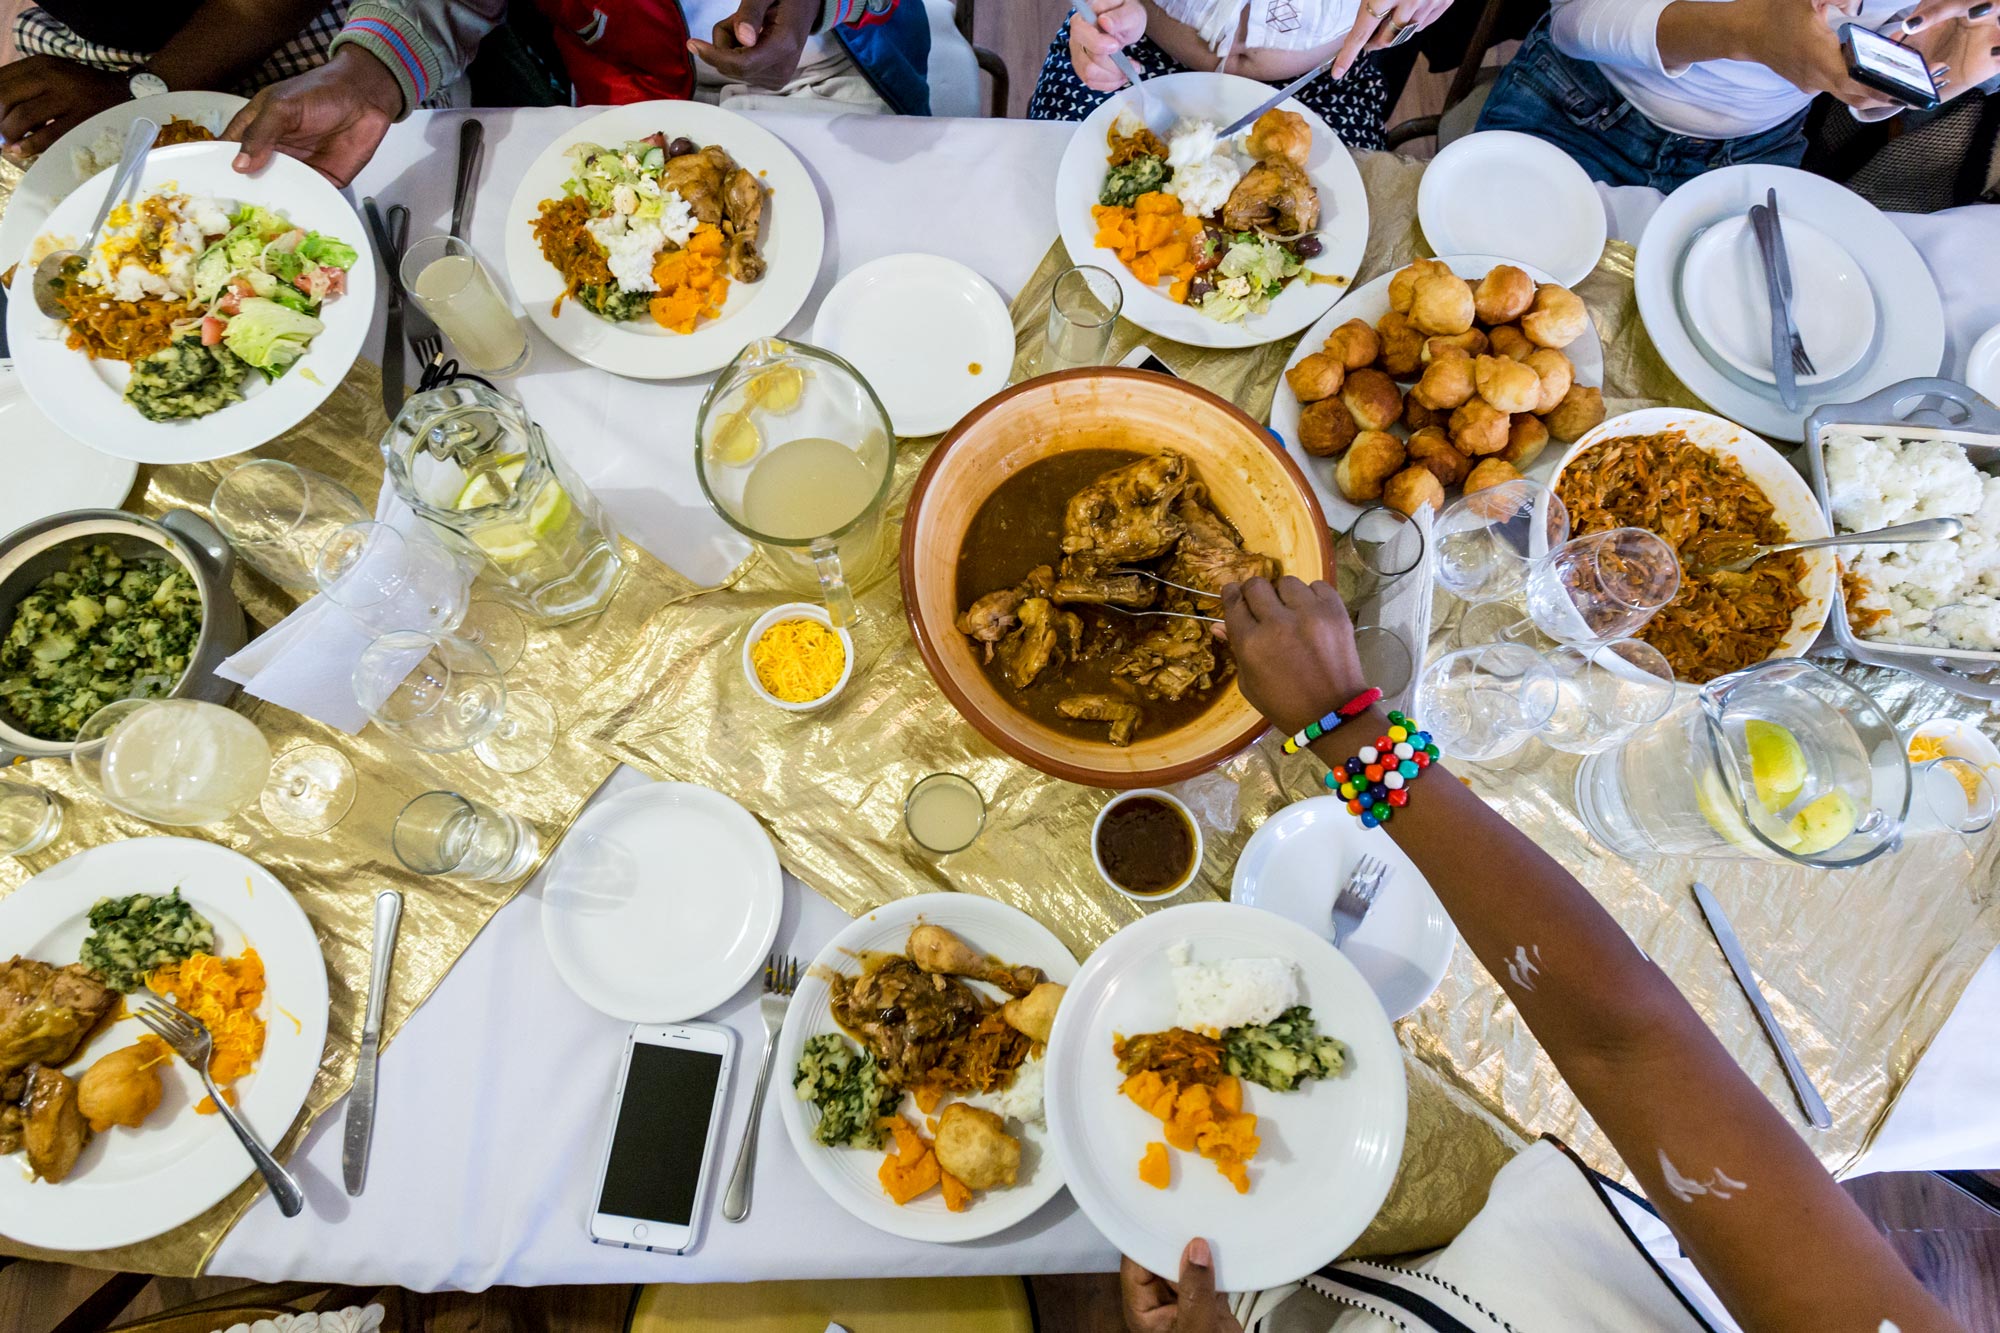 Aerial view of a table full of various food in dishes on peoples plates